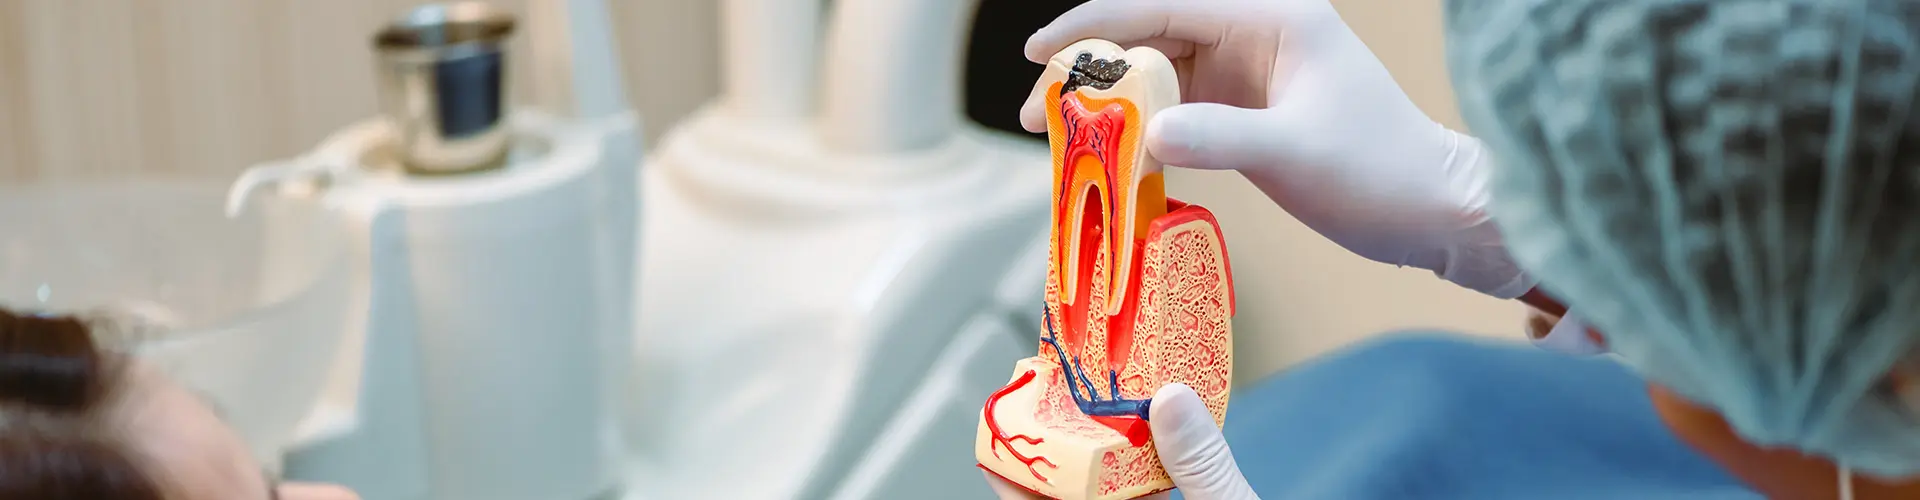 hands holding tooth anatomy model in front of patient